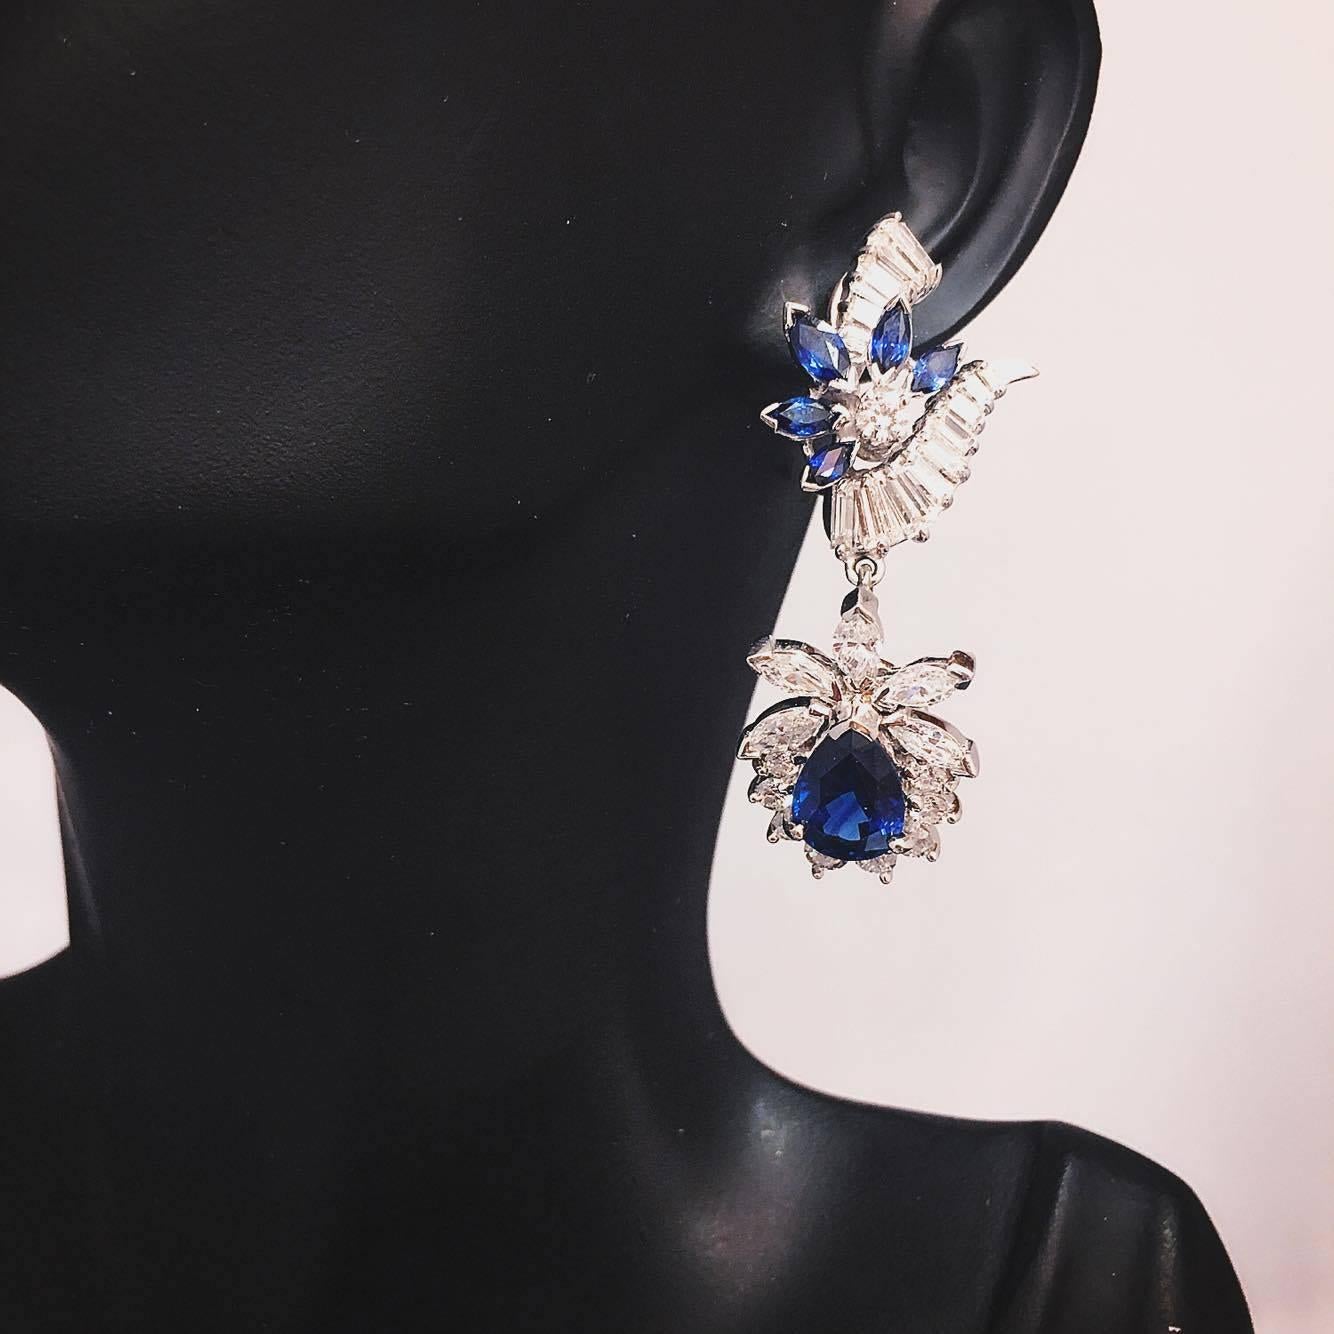 2 Pear shape deep rich blue sapphires totaling 6.54cts 
10 marquise sapphires totaling 1.90cts
18 round, 10 marquise, 30 tapered baguette diamonds totaling 6.03cts.
You can remove the bottom pear shape piece and wear the earring without that part